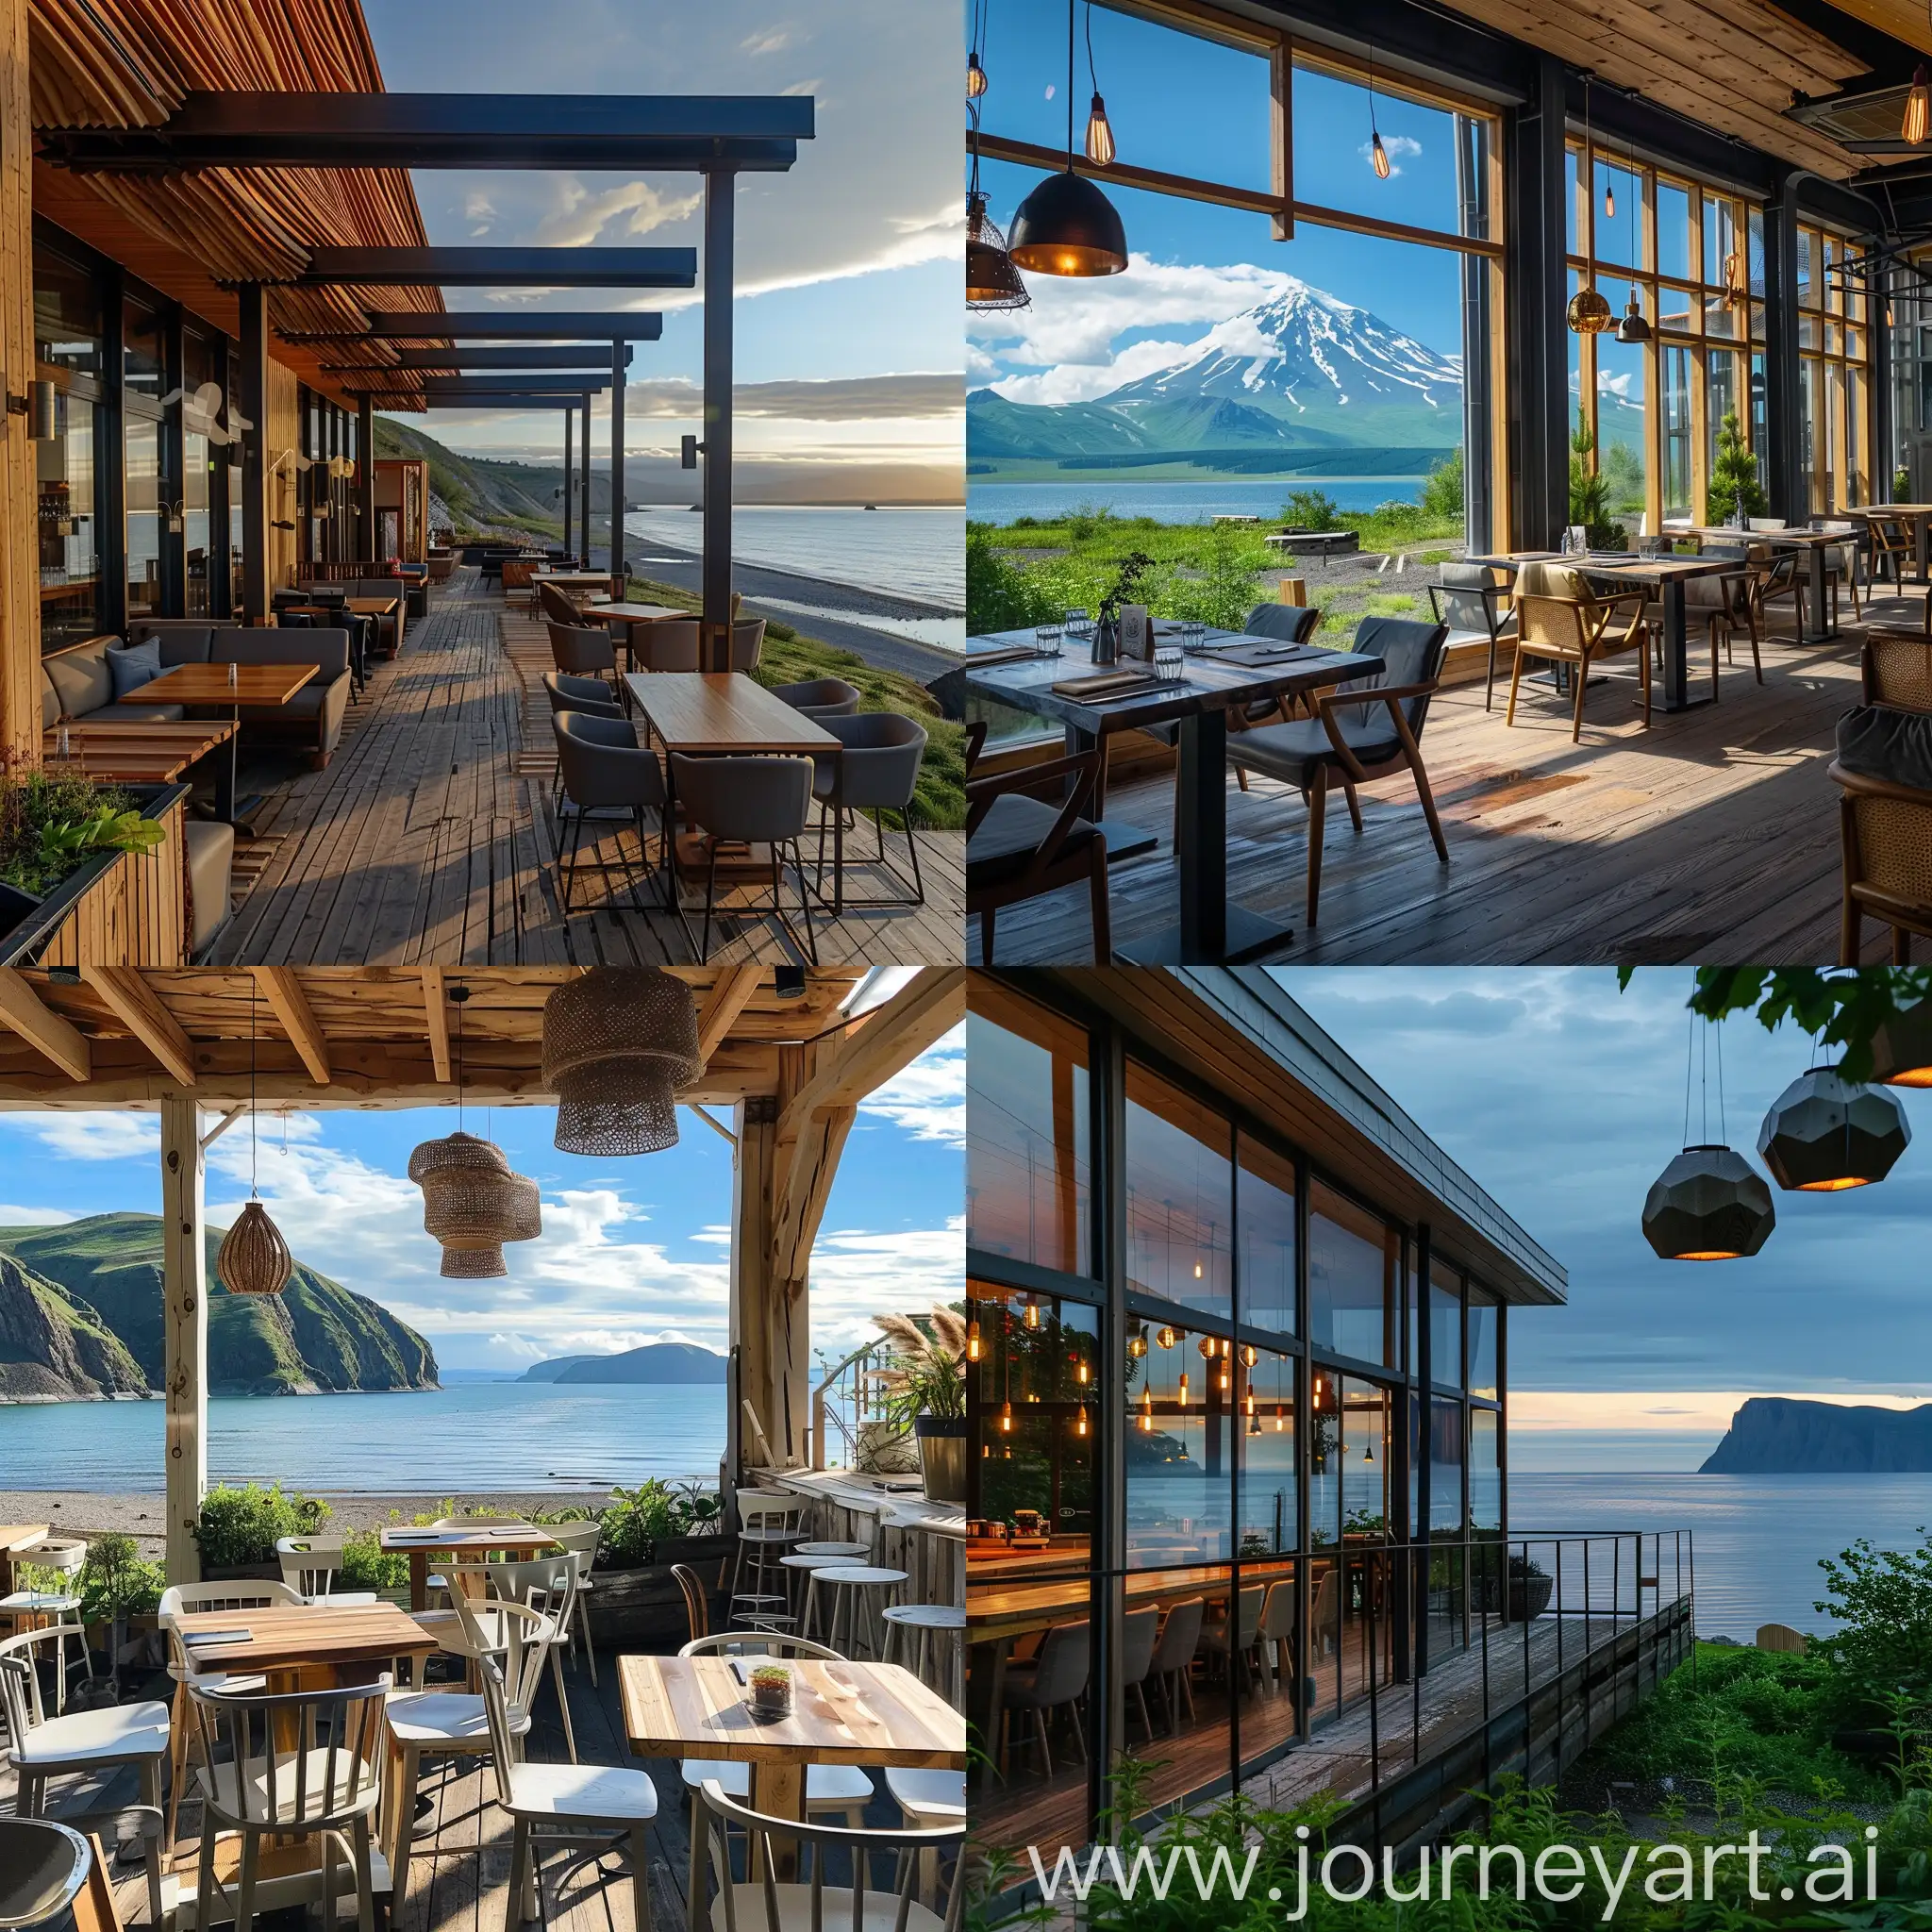 prompt modern bistro in Kamchatka on the shores of the Pacific Ocean, very stylish and progressive, cozy and pleasant place in nature